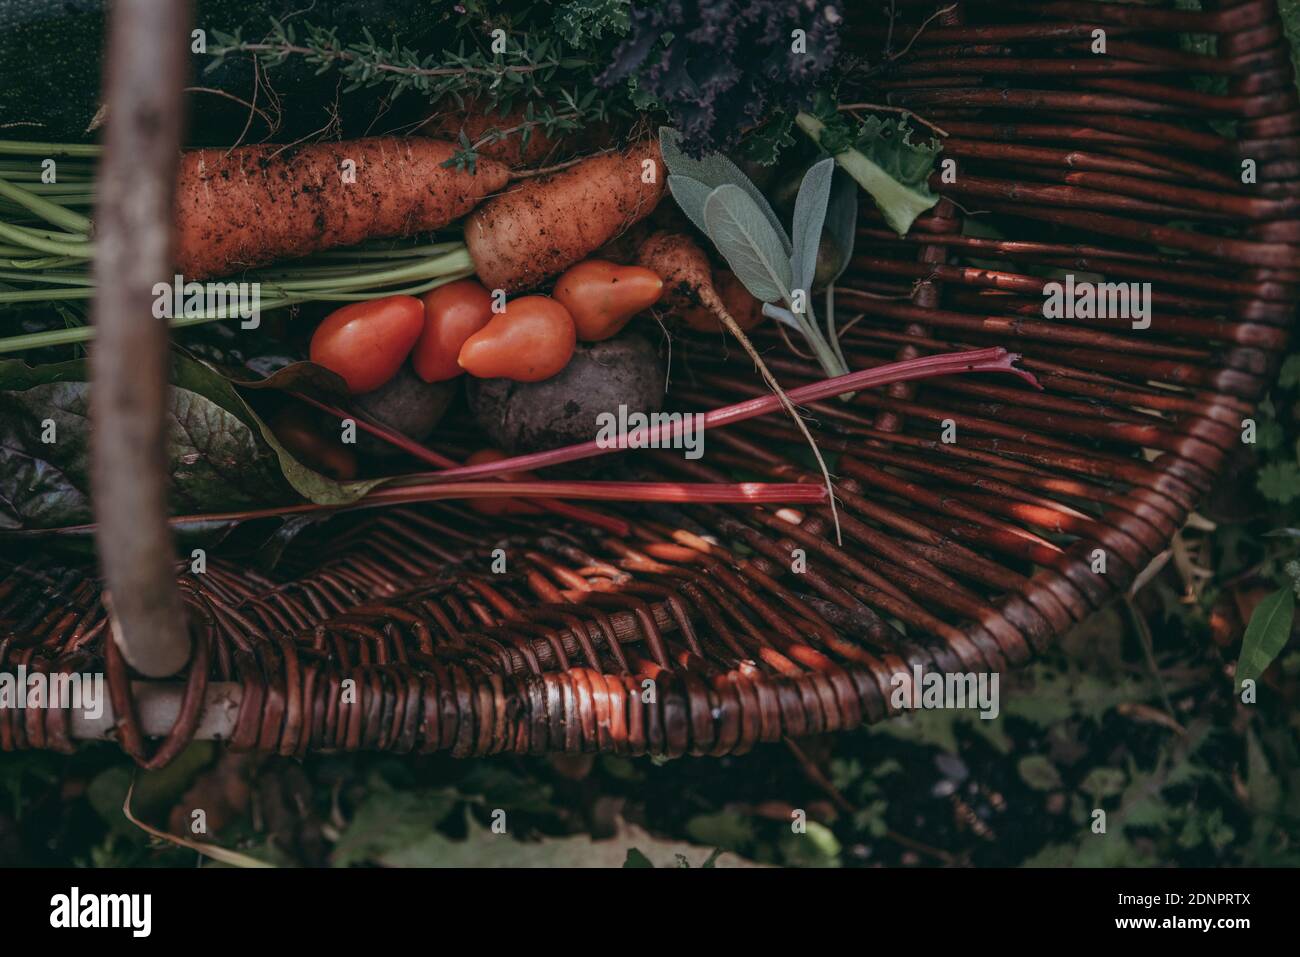 Vegetables and herbs in basket Stock Photo